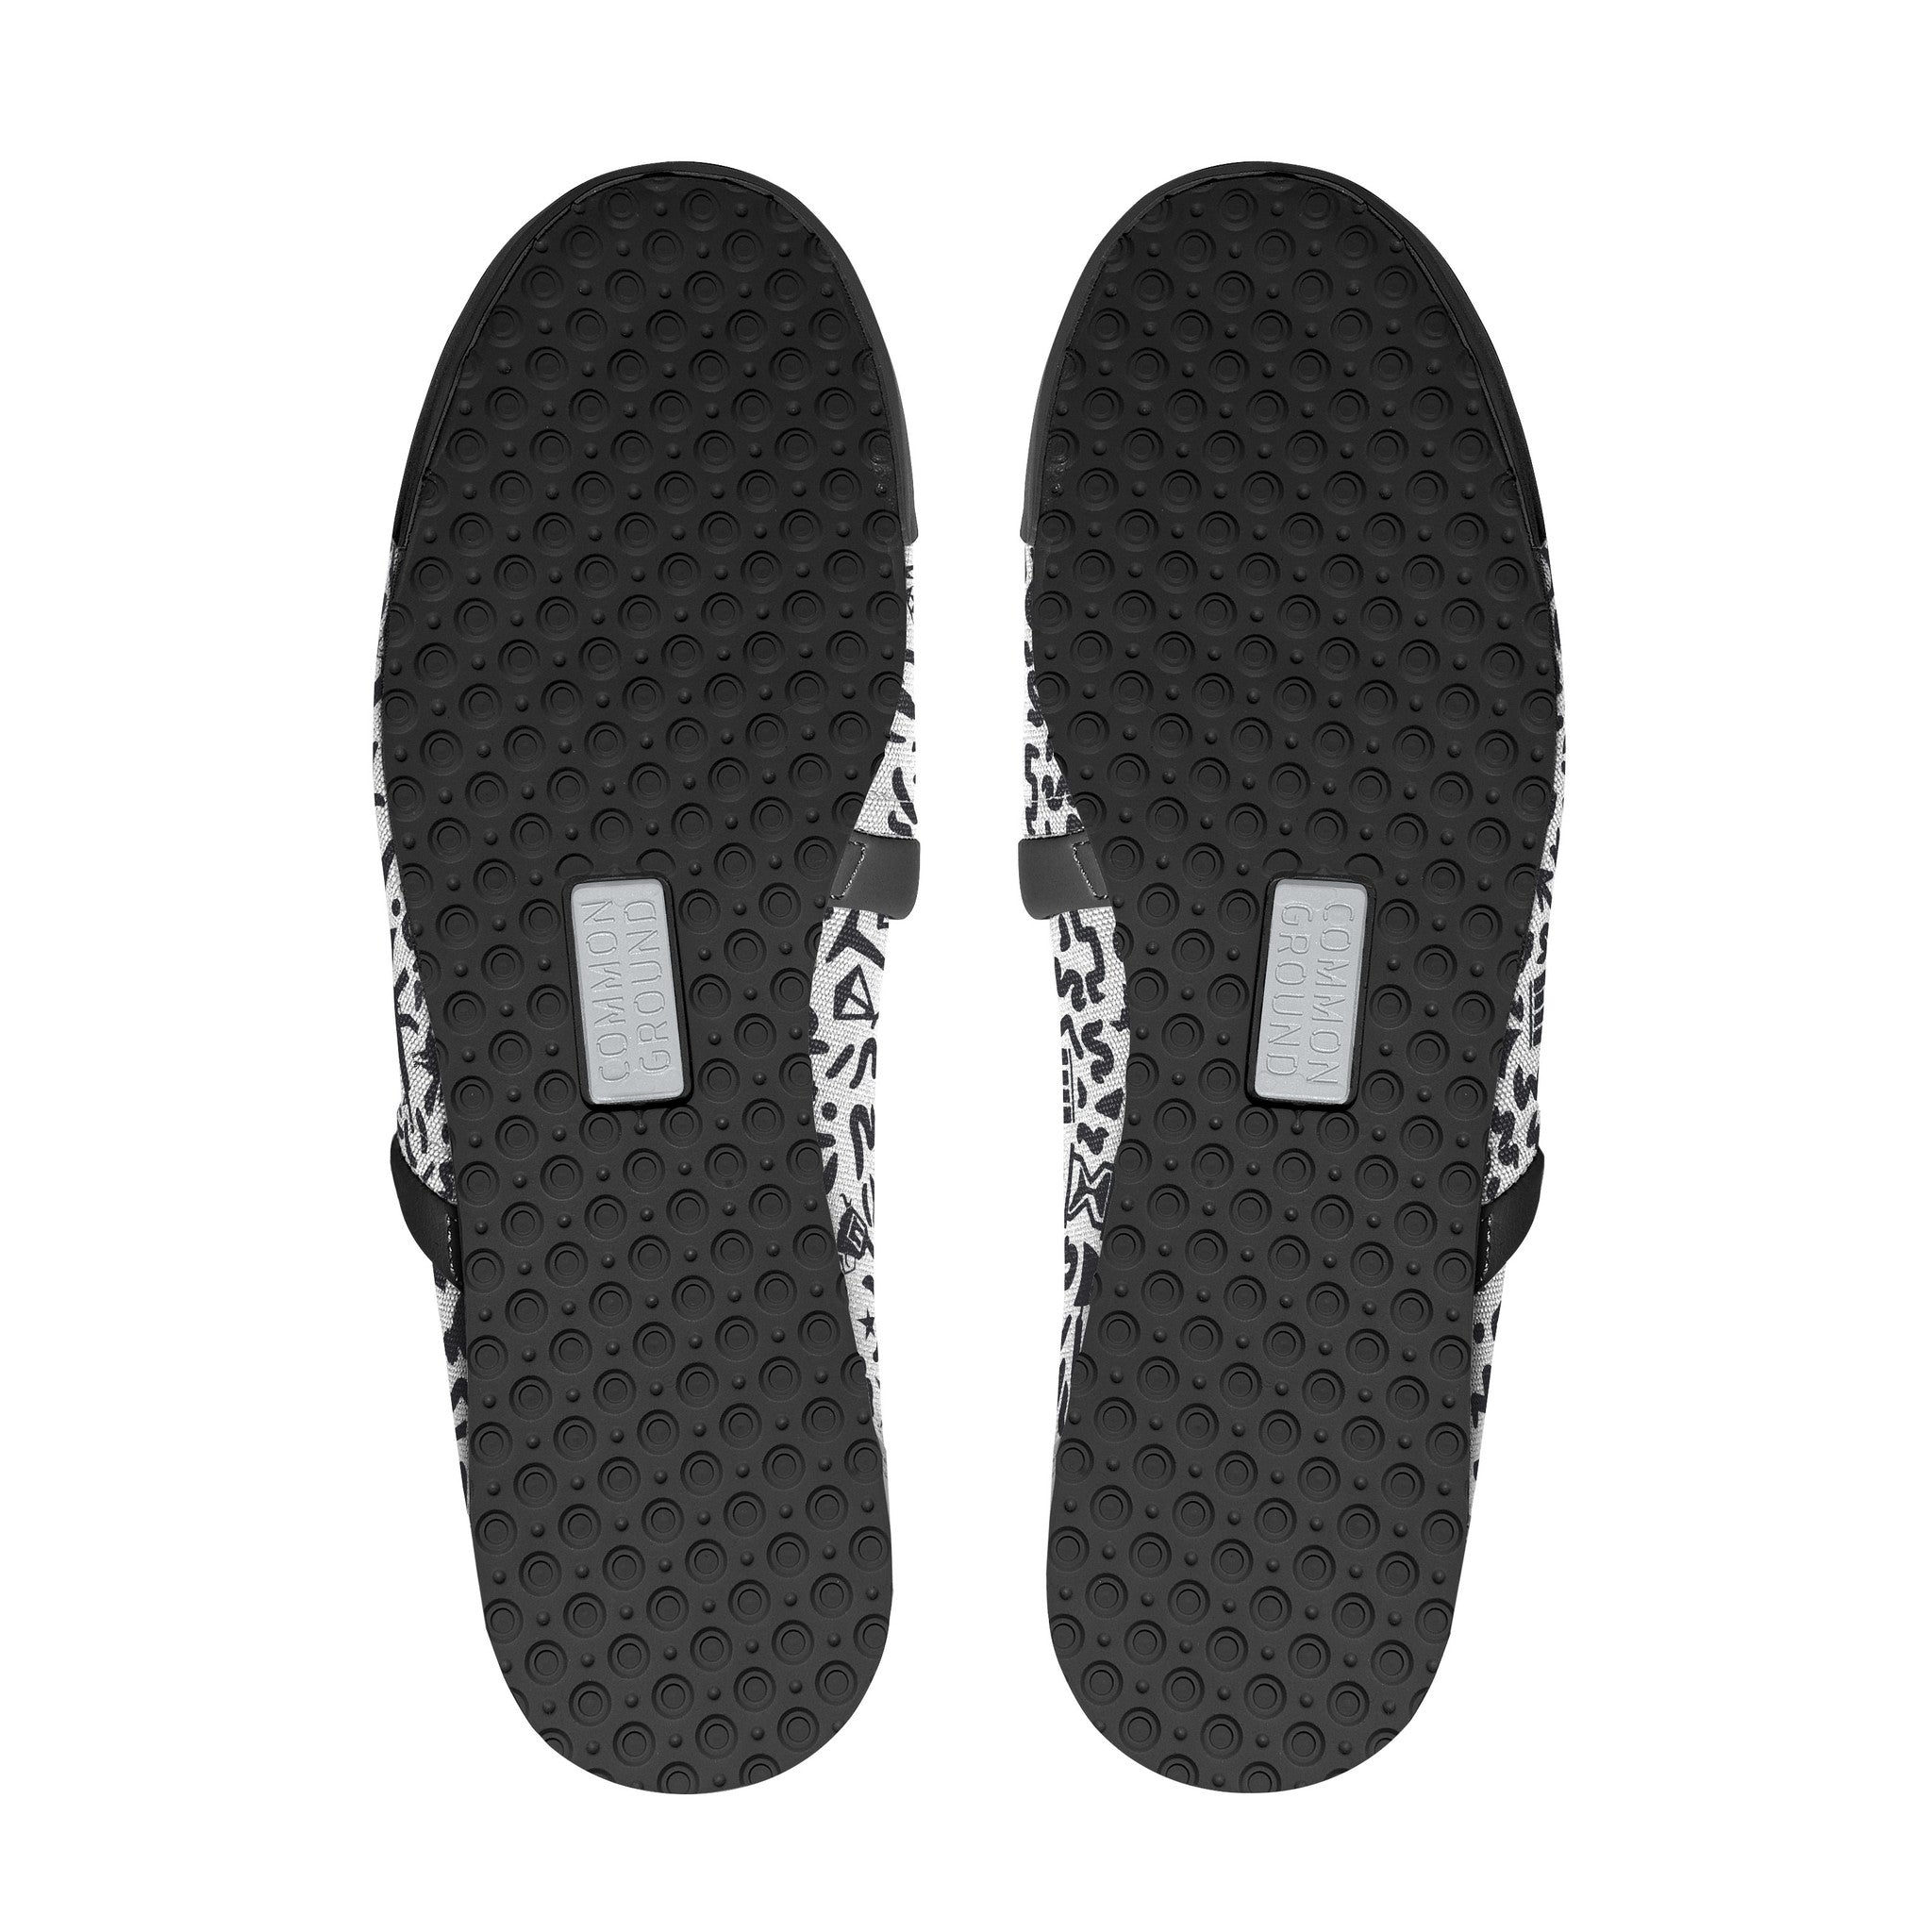 Jet_Black - Common Ground Footwear Shoes Bottom View